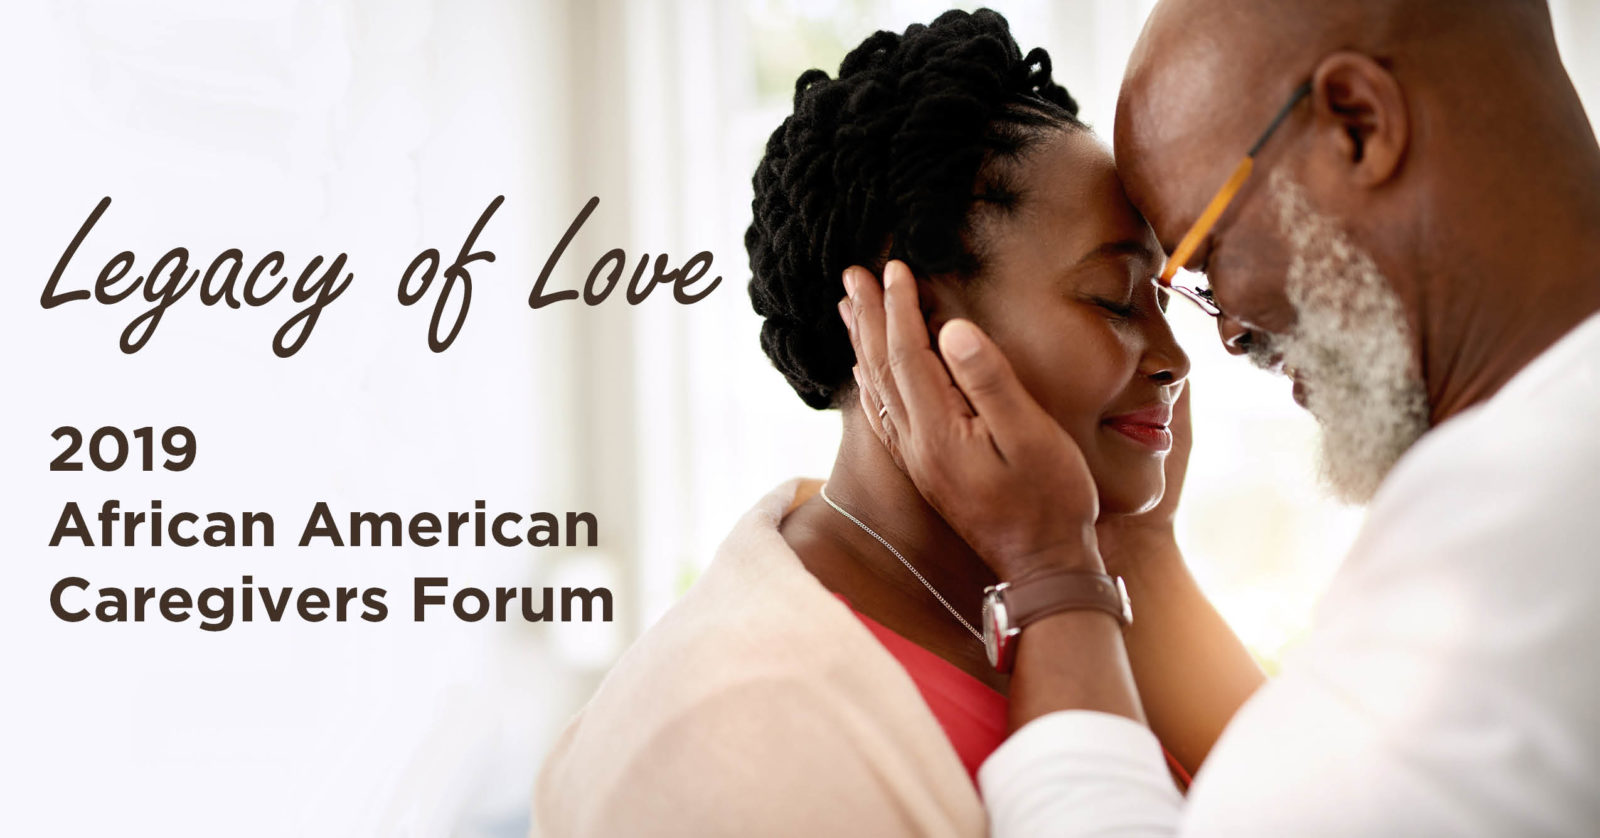 image for Legacy of Love, the 2019 African American Caregivers Forum, includes an older African American man, lovingly cupping the face of an older African American woman, with foreheads touching